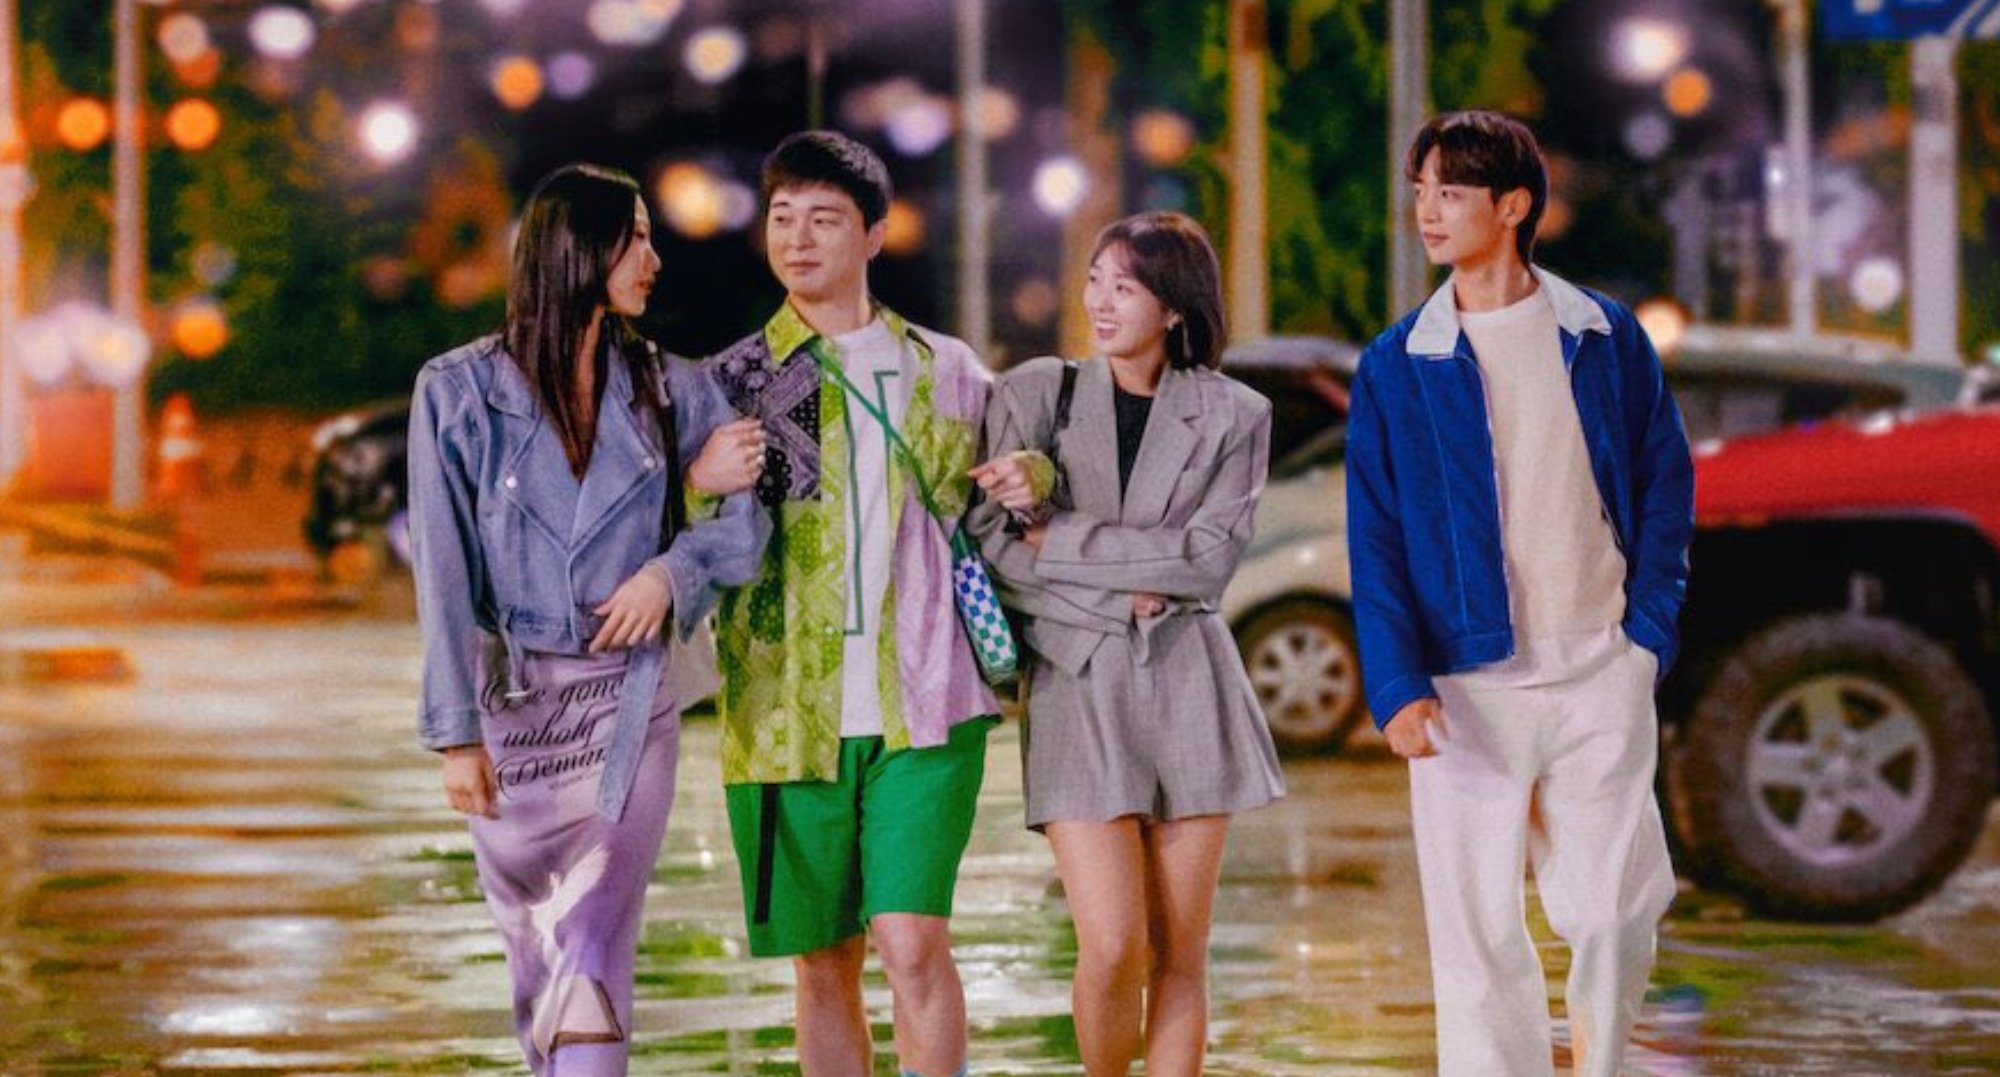 ‘The Fabulous’: Choi Min-ho and Chae Soo-bin  Star in a Netflix Romance K-Drama Set in the Fashion Industry